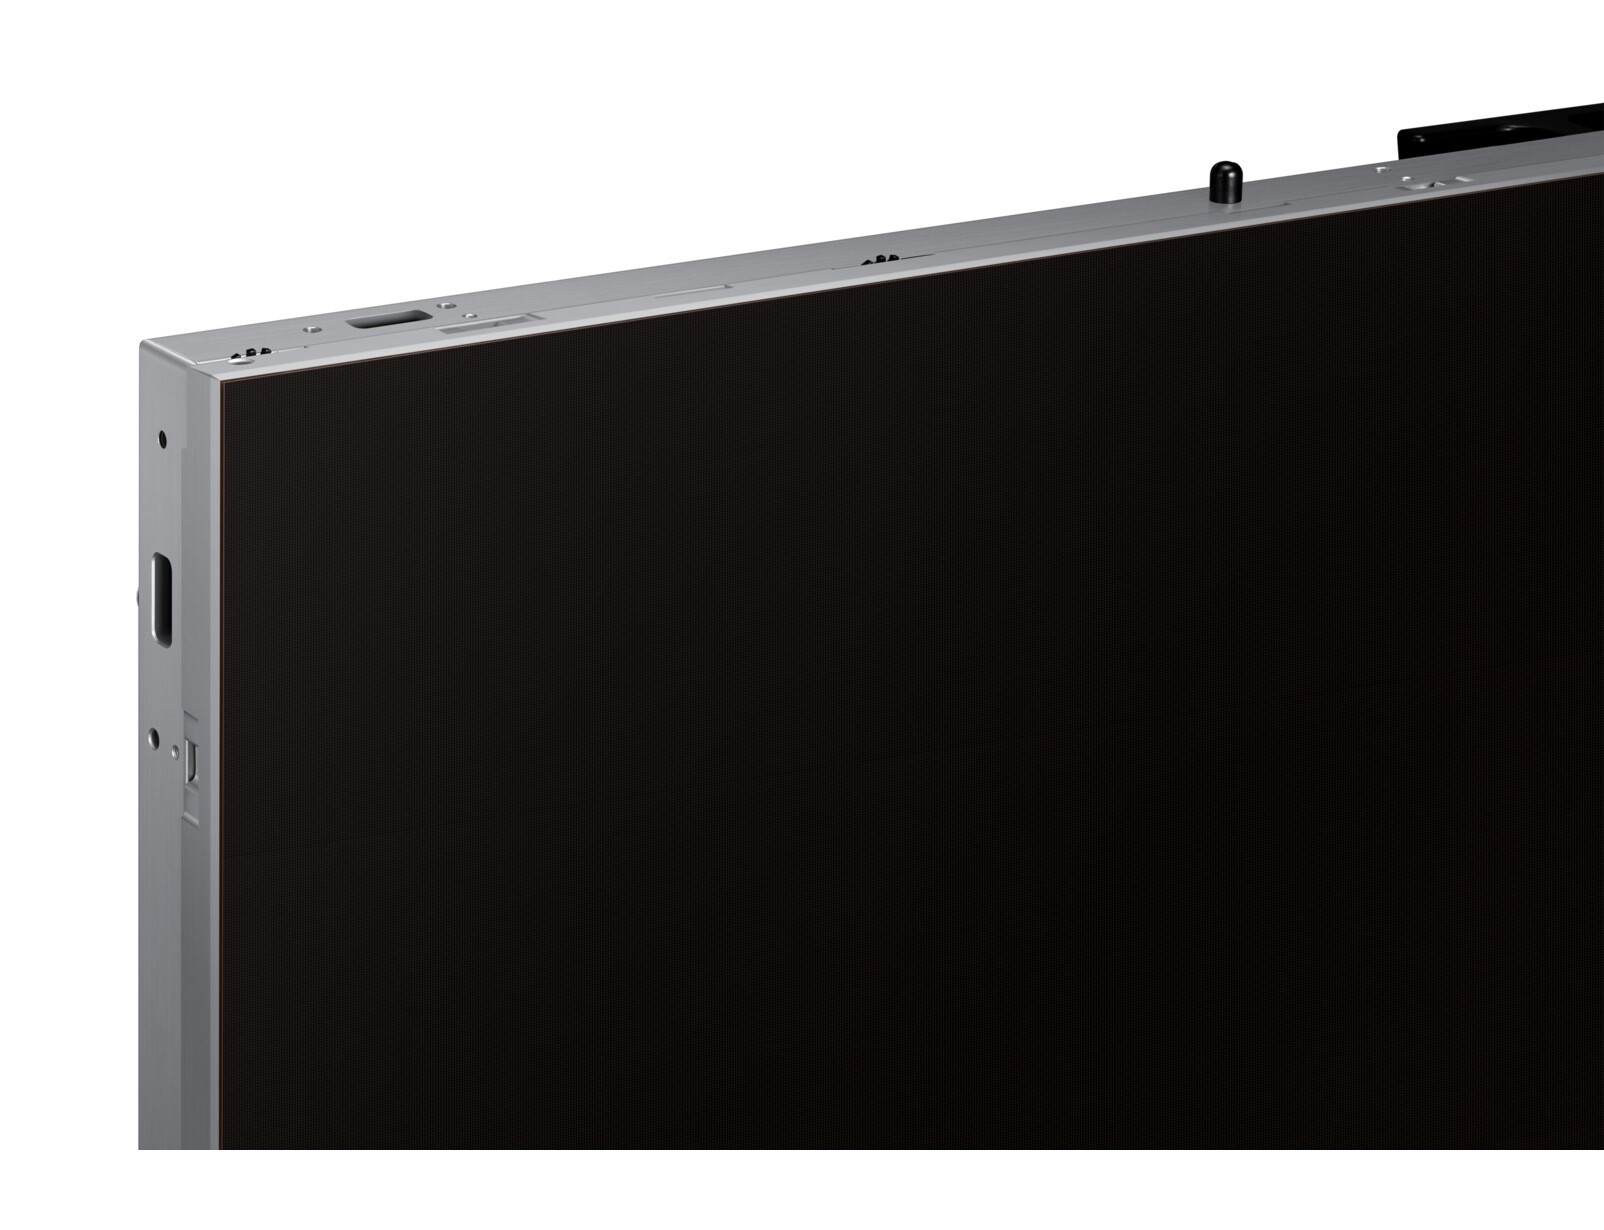 Samsung-The-Wall-for-business-IW008J-UHD-Paket-LED-Wall-0-84mm-Pixel-Pitch